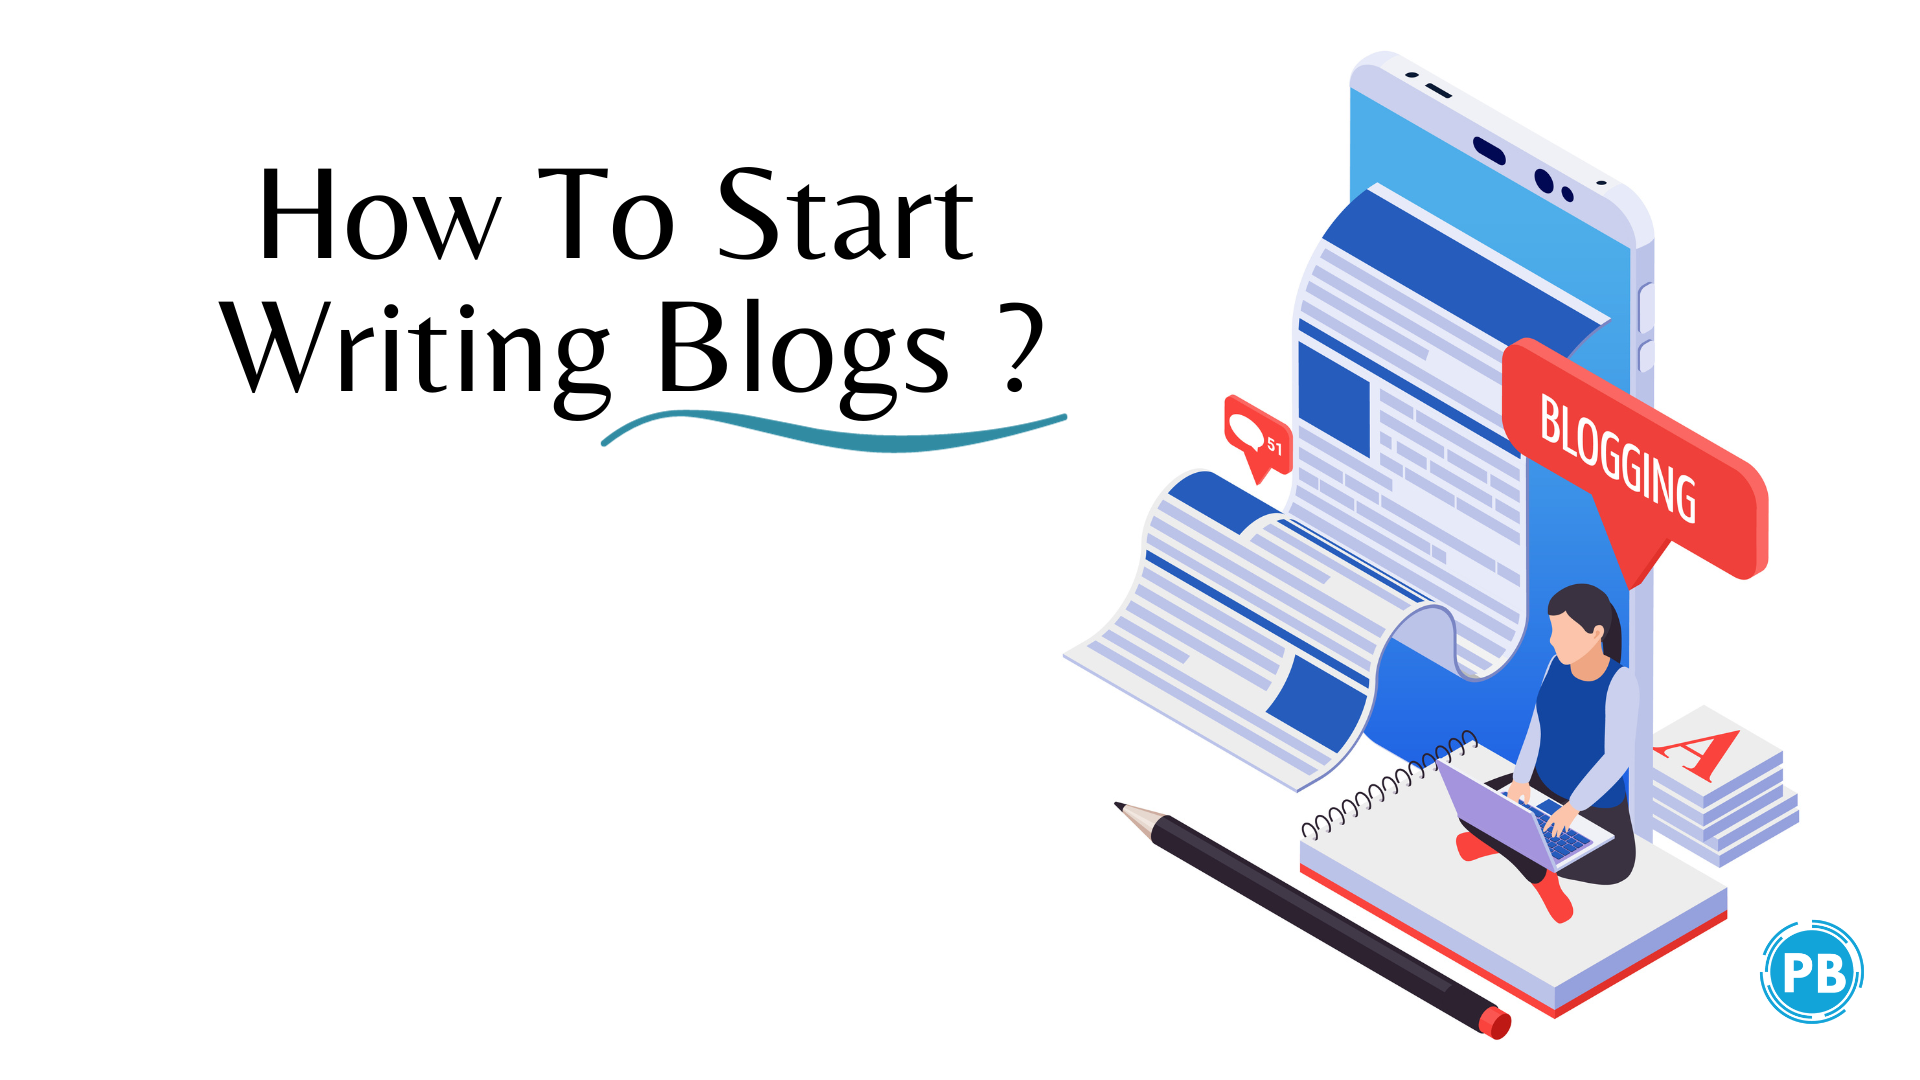 How to Start Writing Blogs ? details